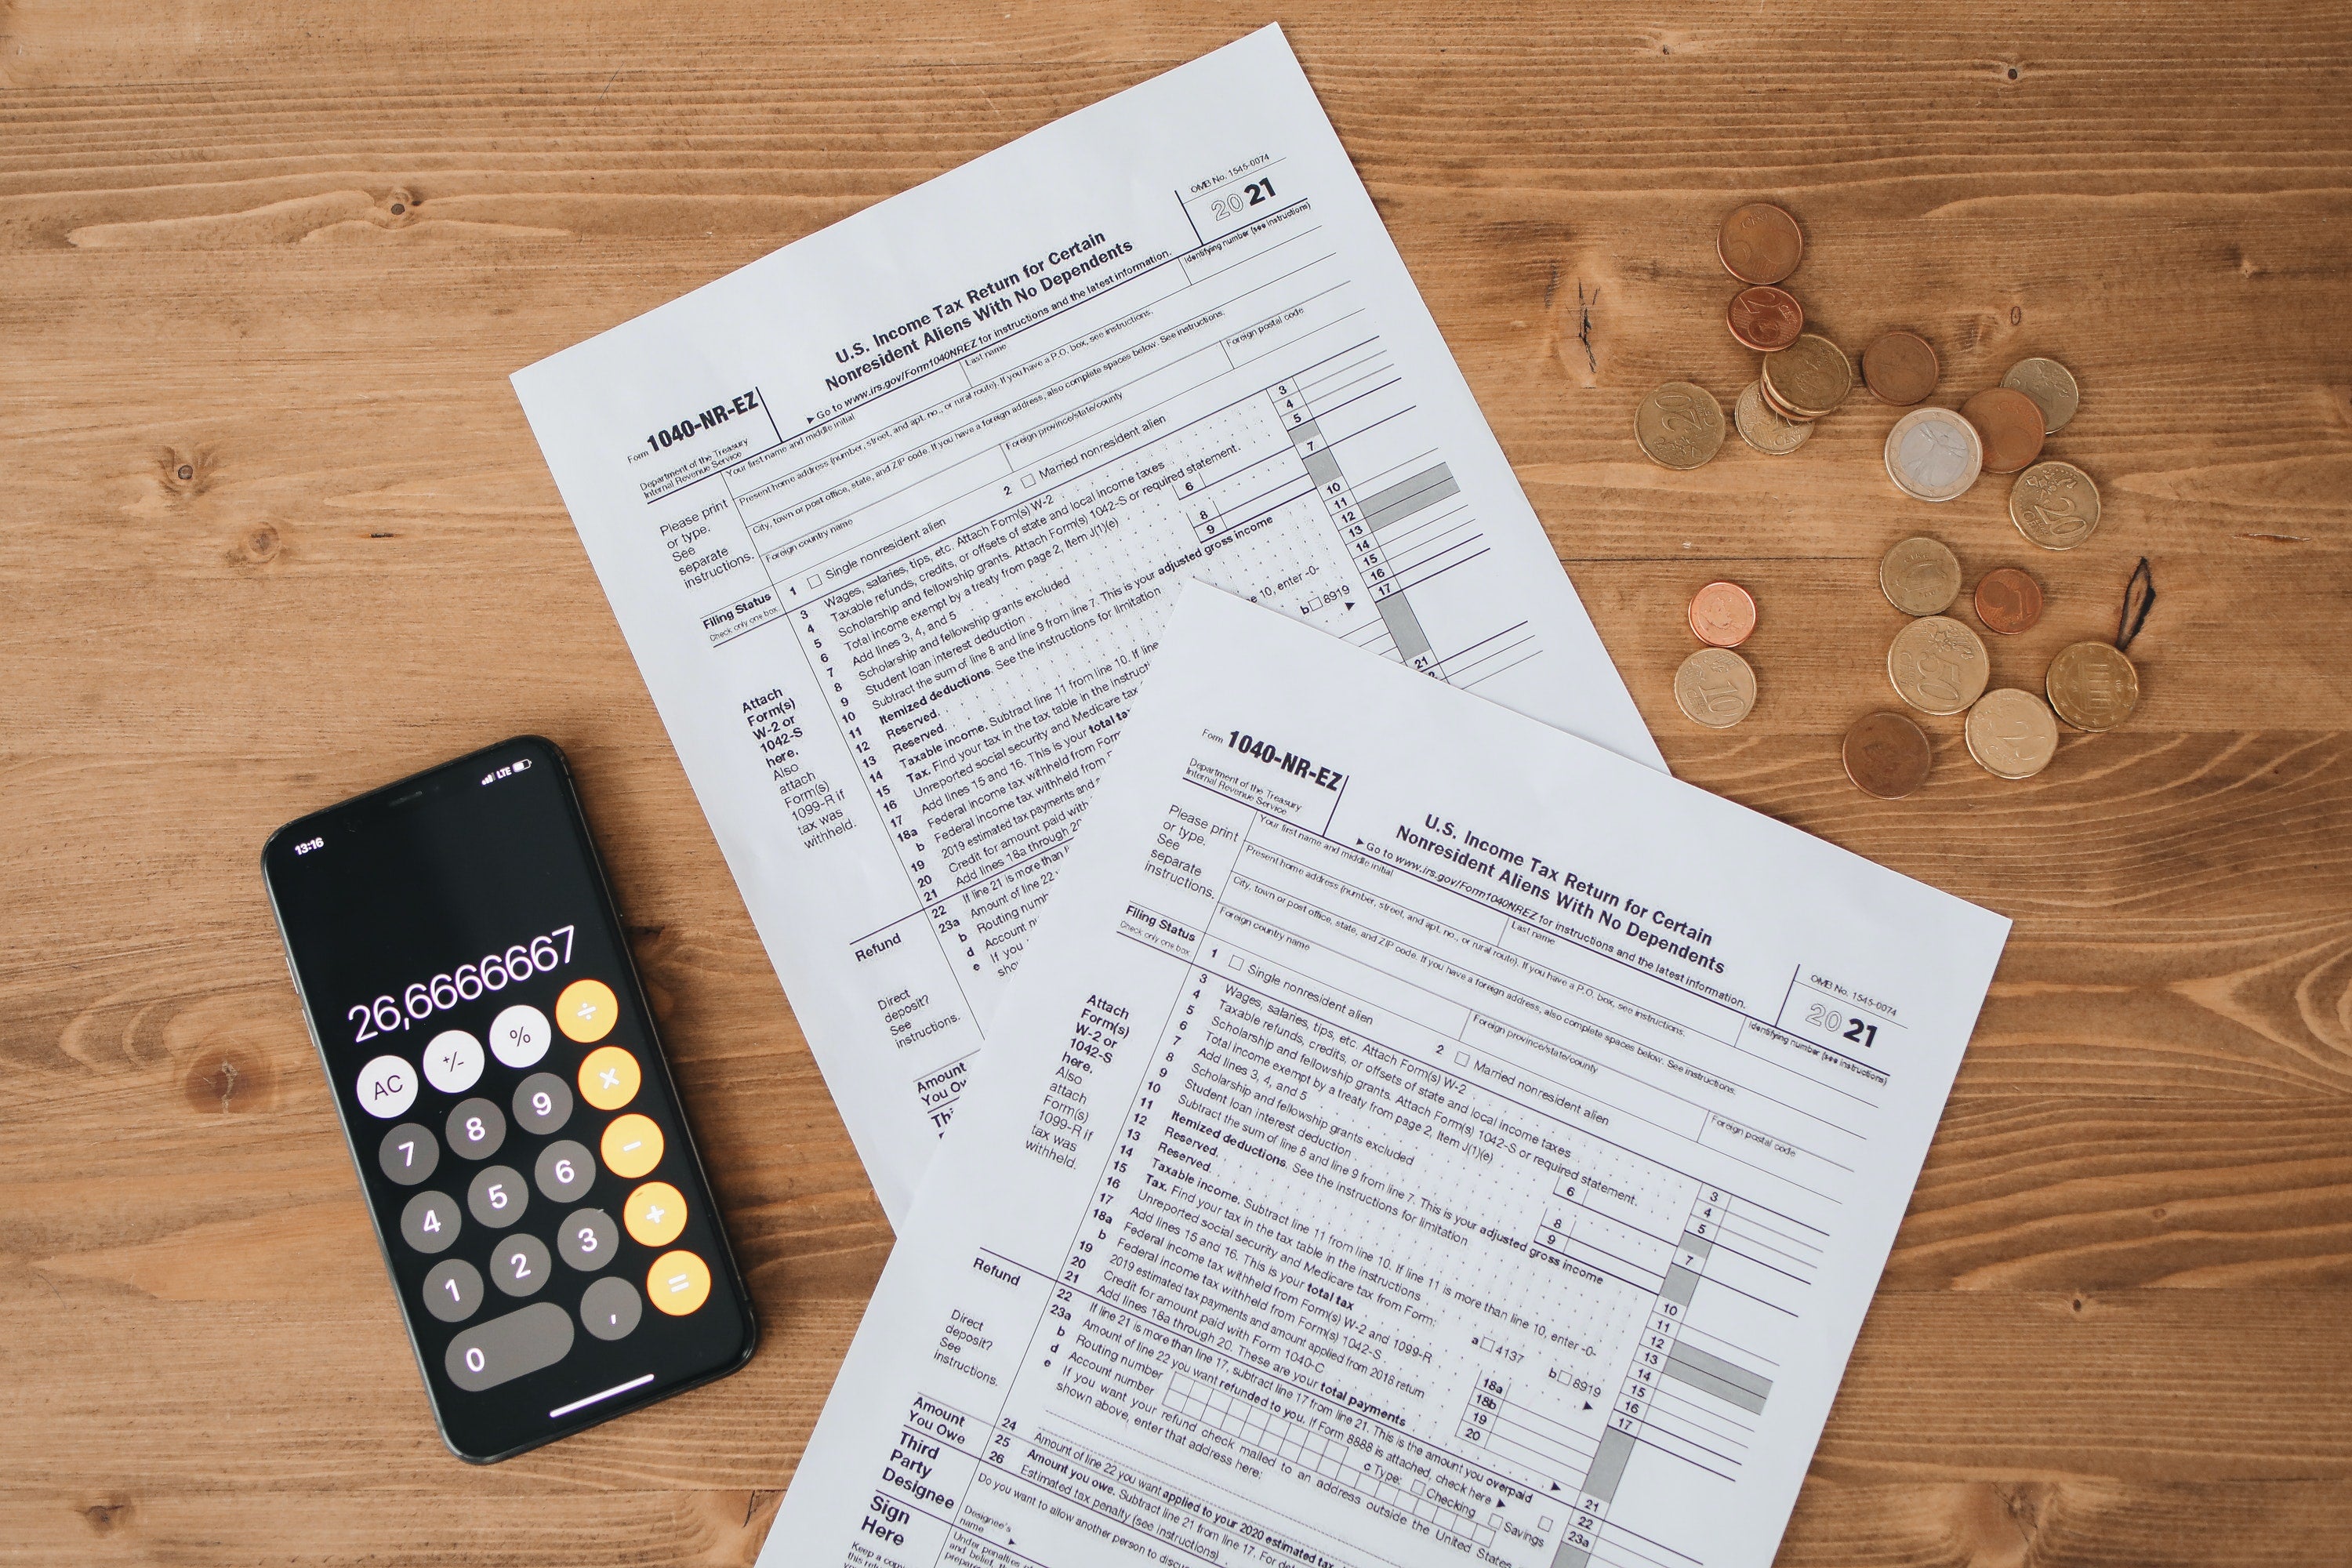 Two 1040 tax forms on a table next to a smartphone with the calculator app open